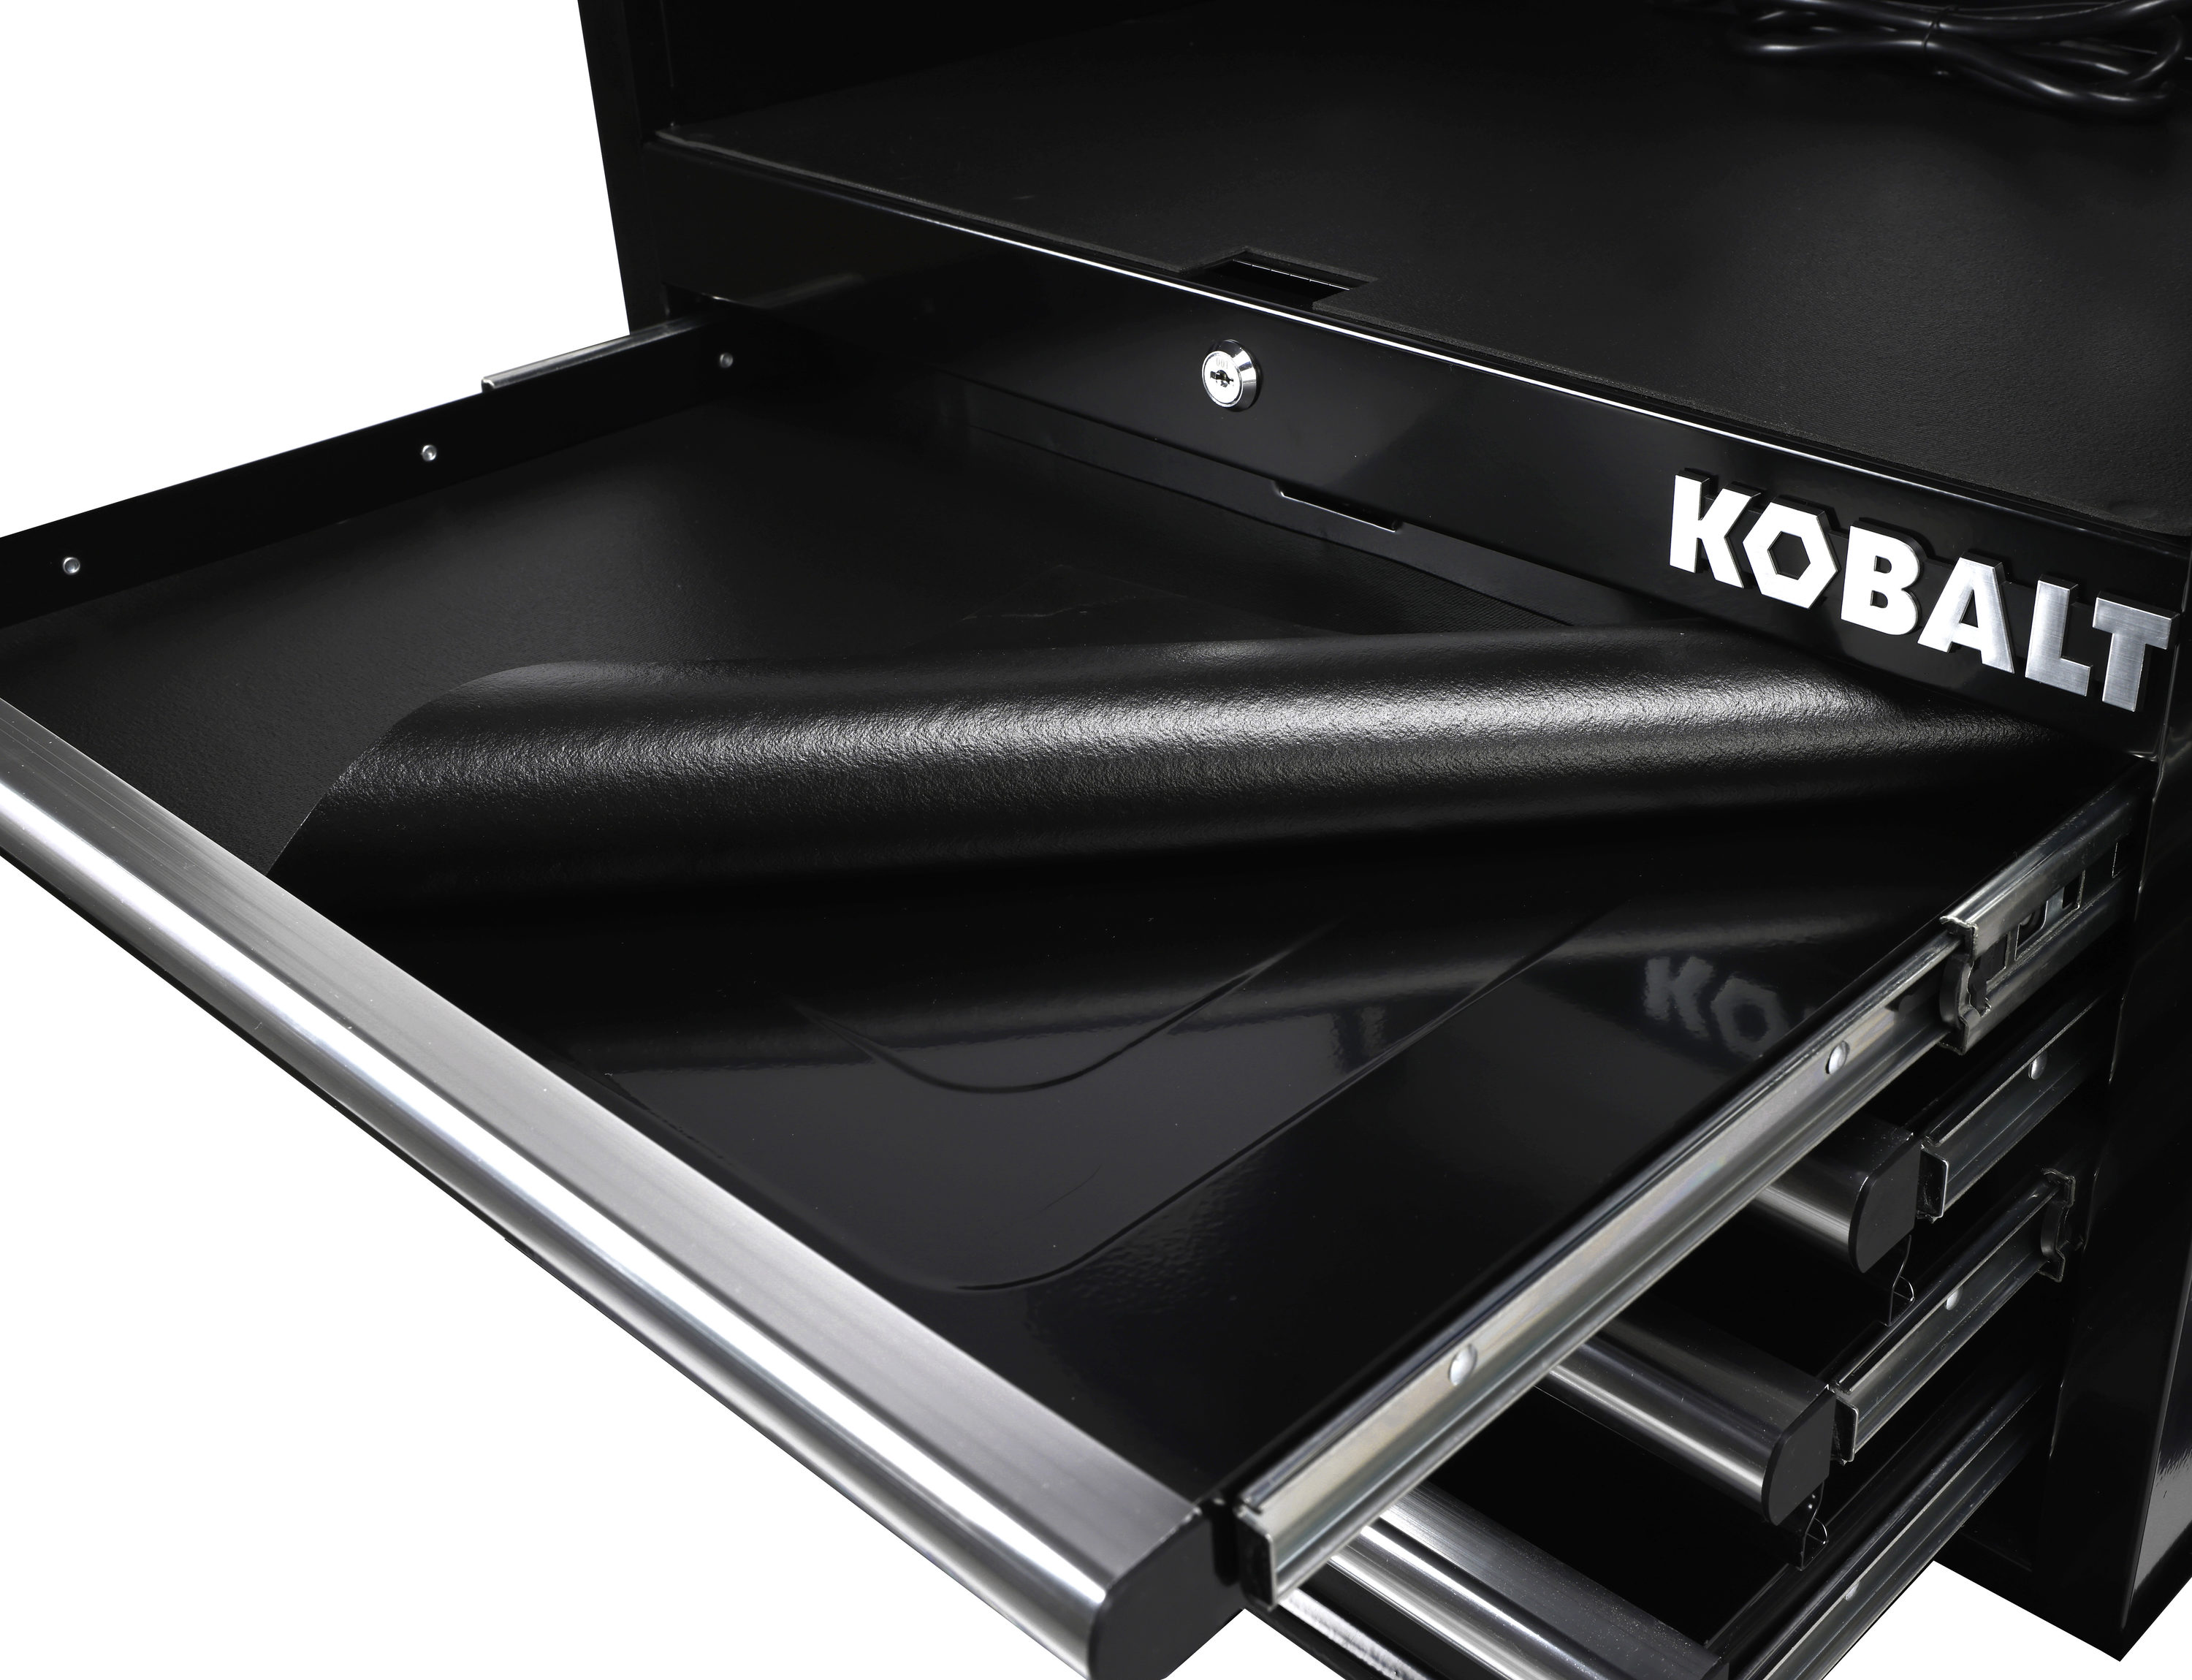 Kobalt 26 In W X 22 In H 4 Drawer Steel Tool Chest Black In The Top